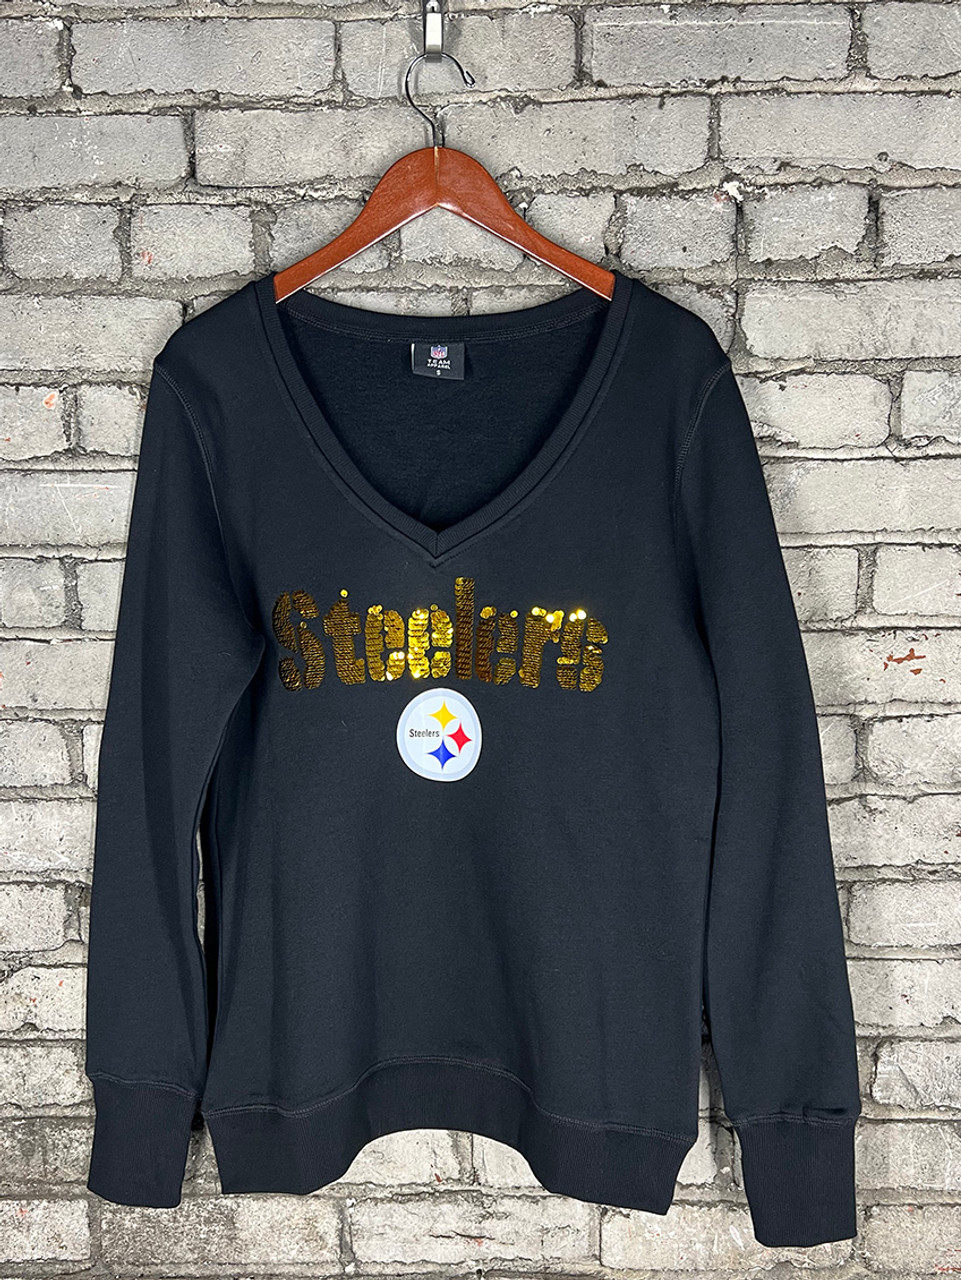 Pittsburgh Steelers Women's Fifth And Ocean Sequin T-Shirt